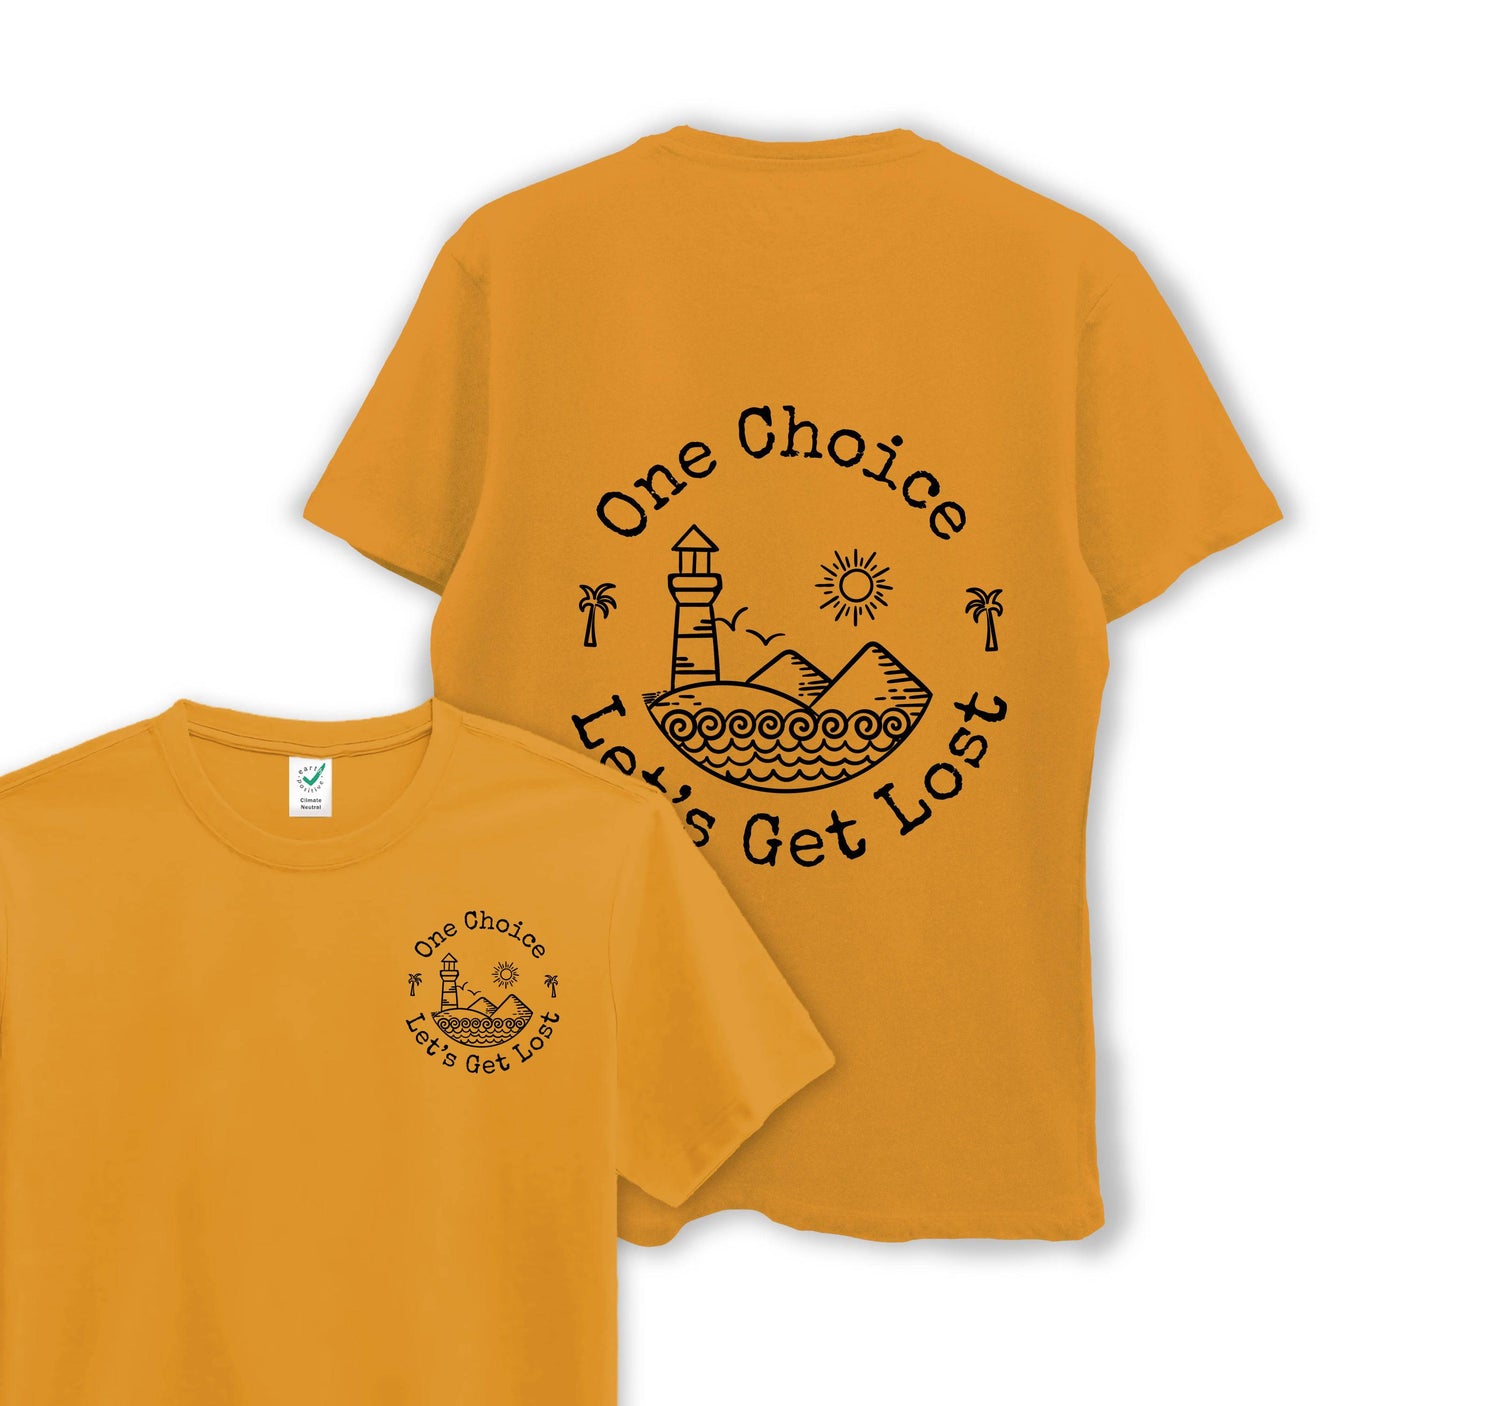 Let's Get Lost - Organic Cotton Tee - One Choice Apparel